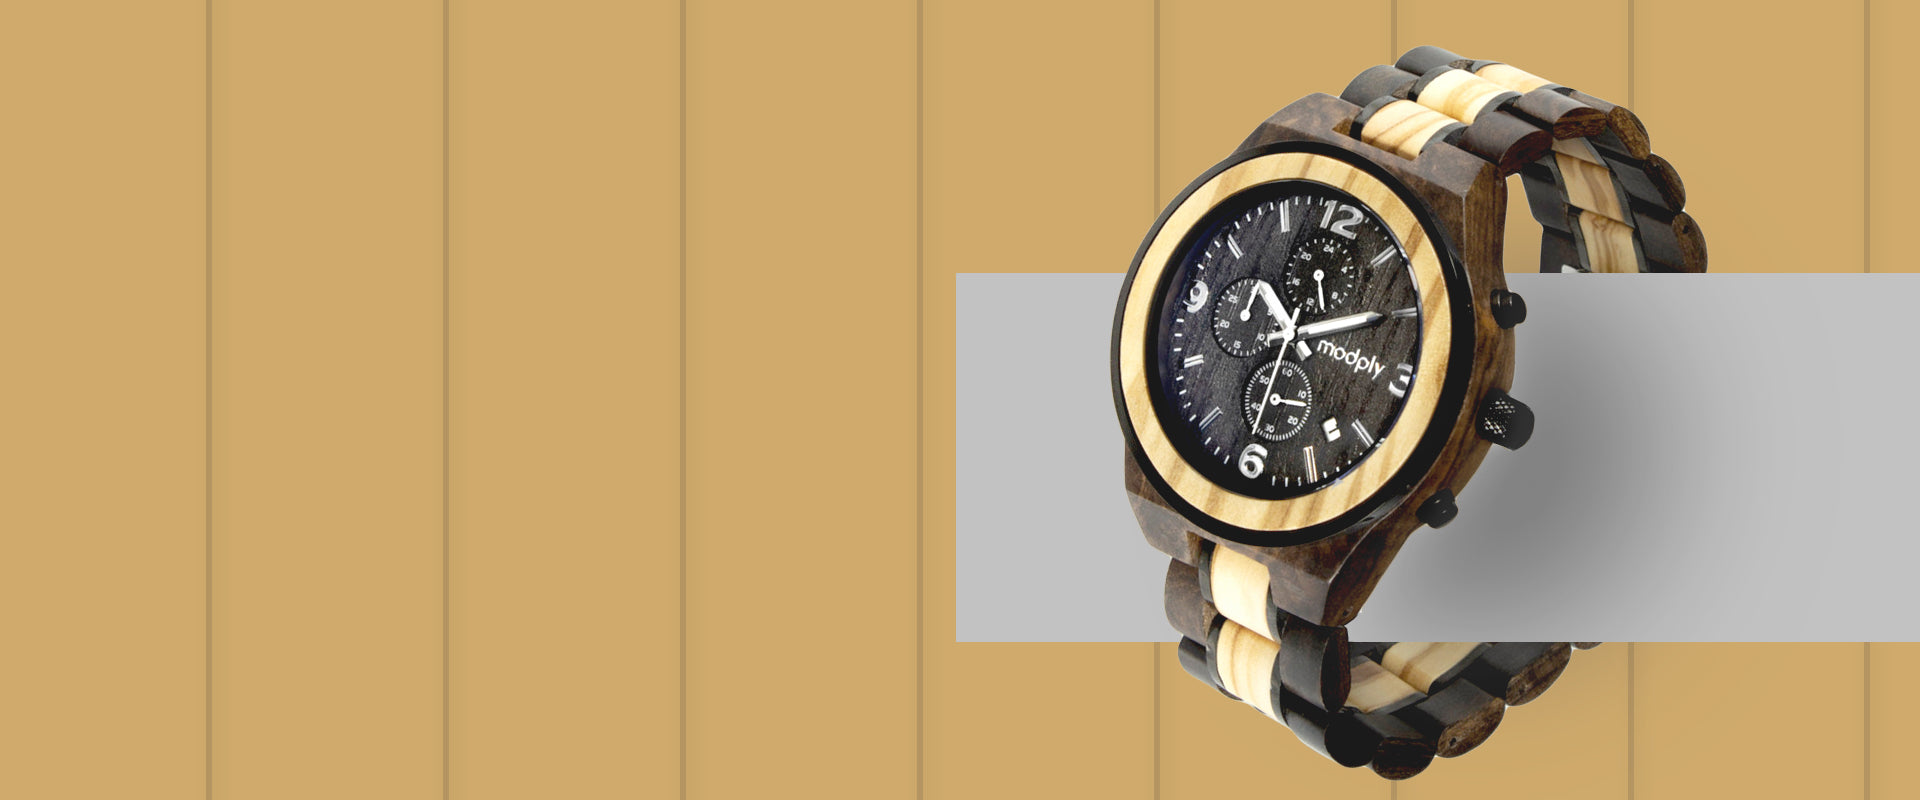 The Store |Buy Used Luxury watches in Dubai |Pre Owned watches